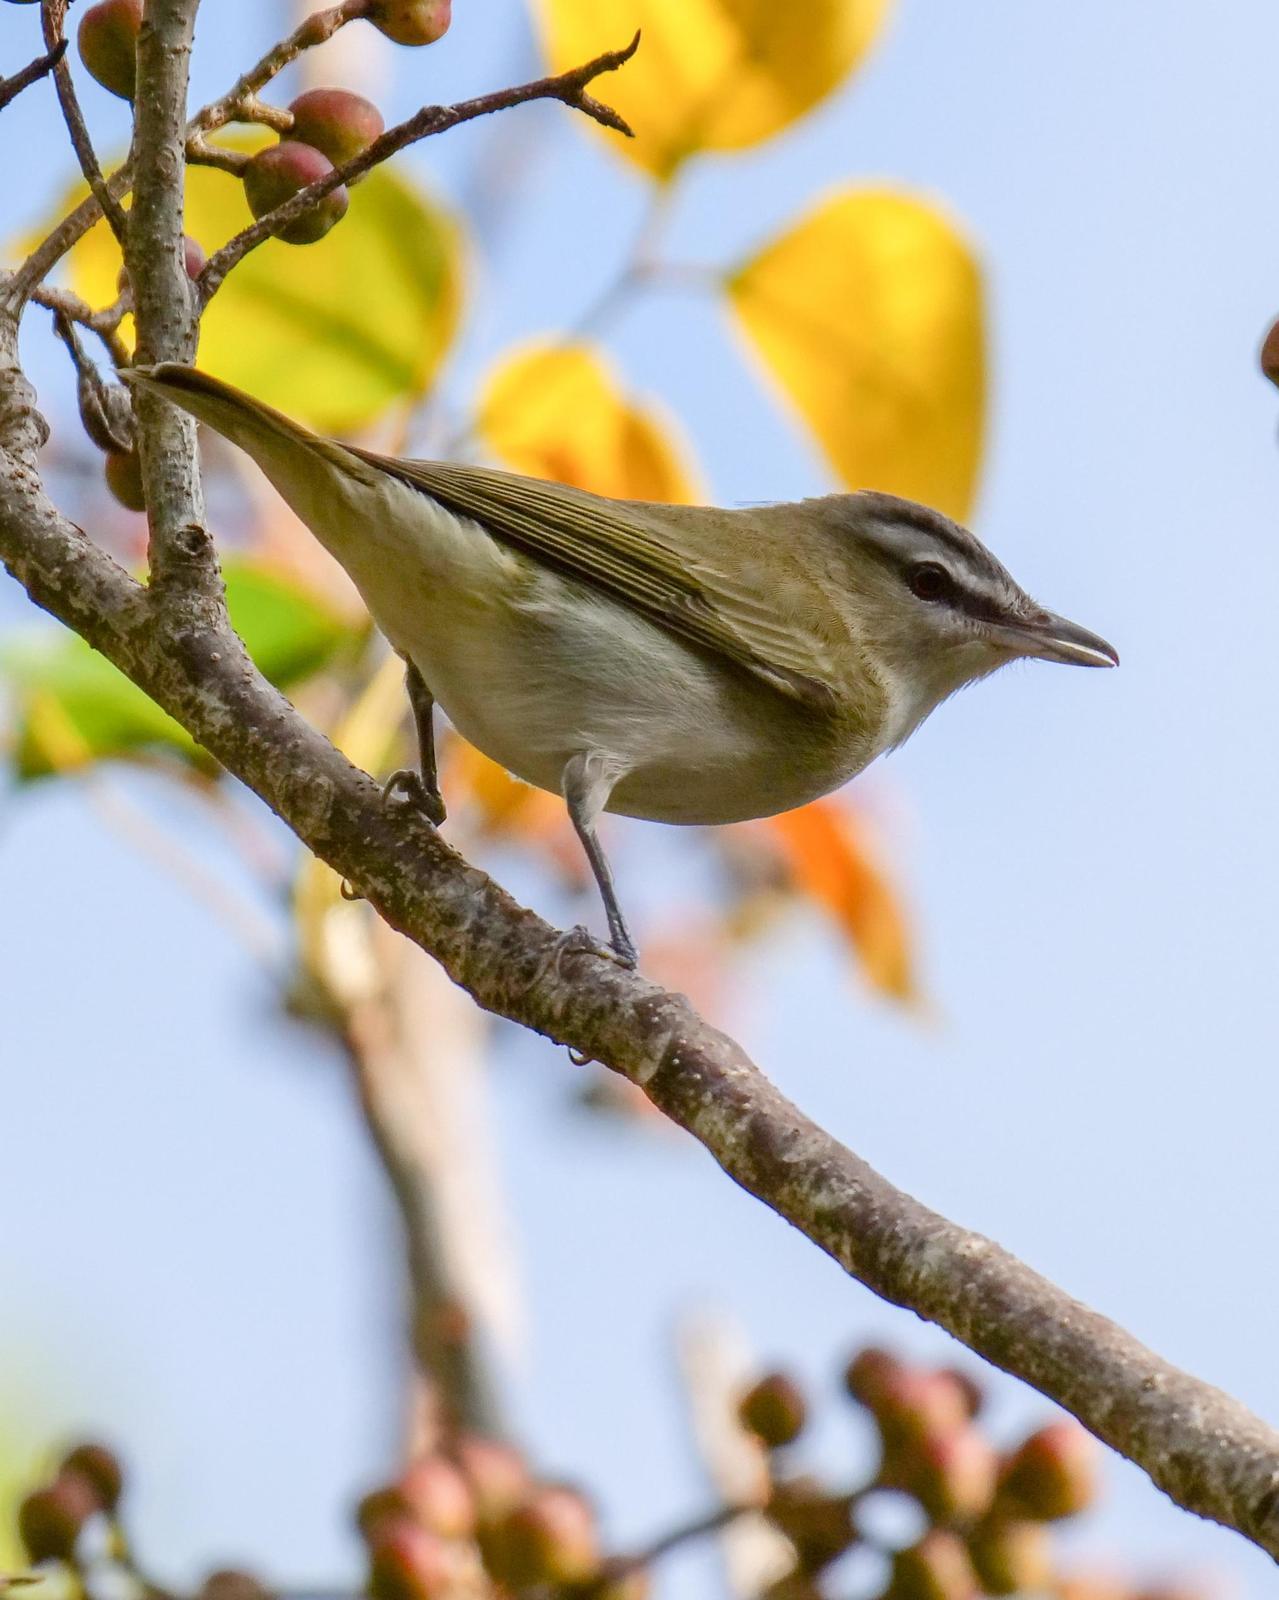 Red-eyed Vireo Photo by Steve Percival